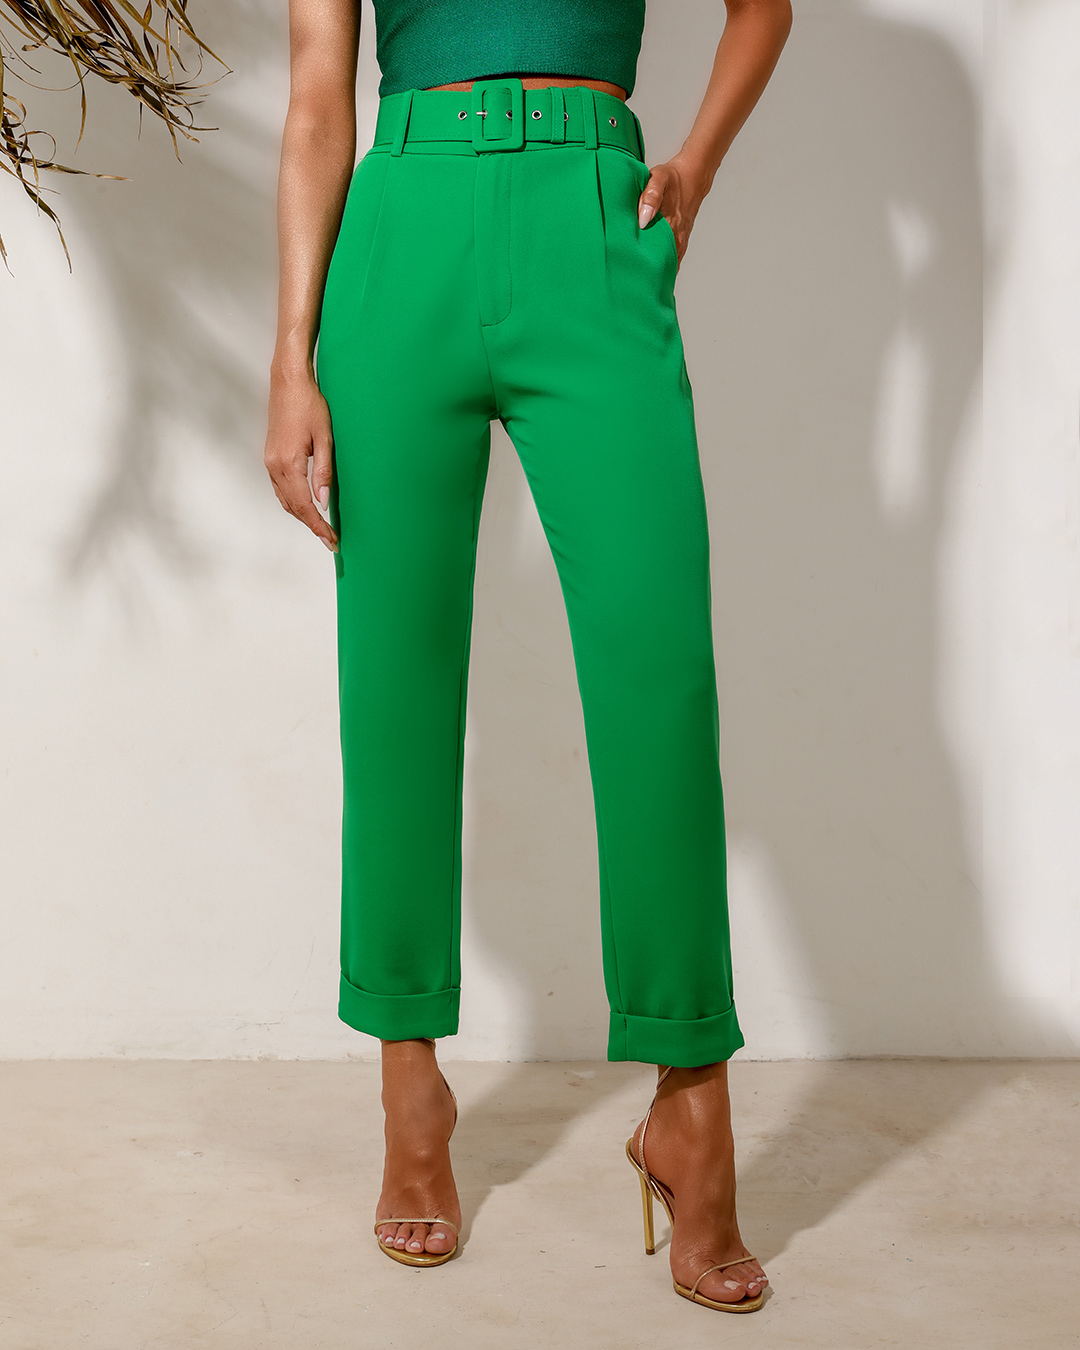 Dot Clothing - Pants Dot Clothing Tailoring High Waist with Green Belt - 1250VERDE